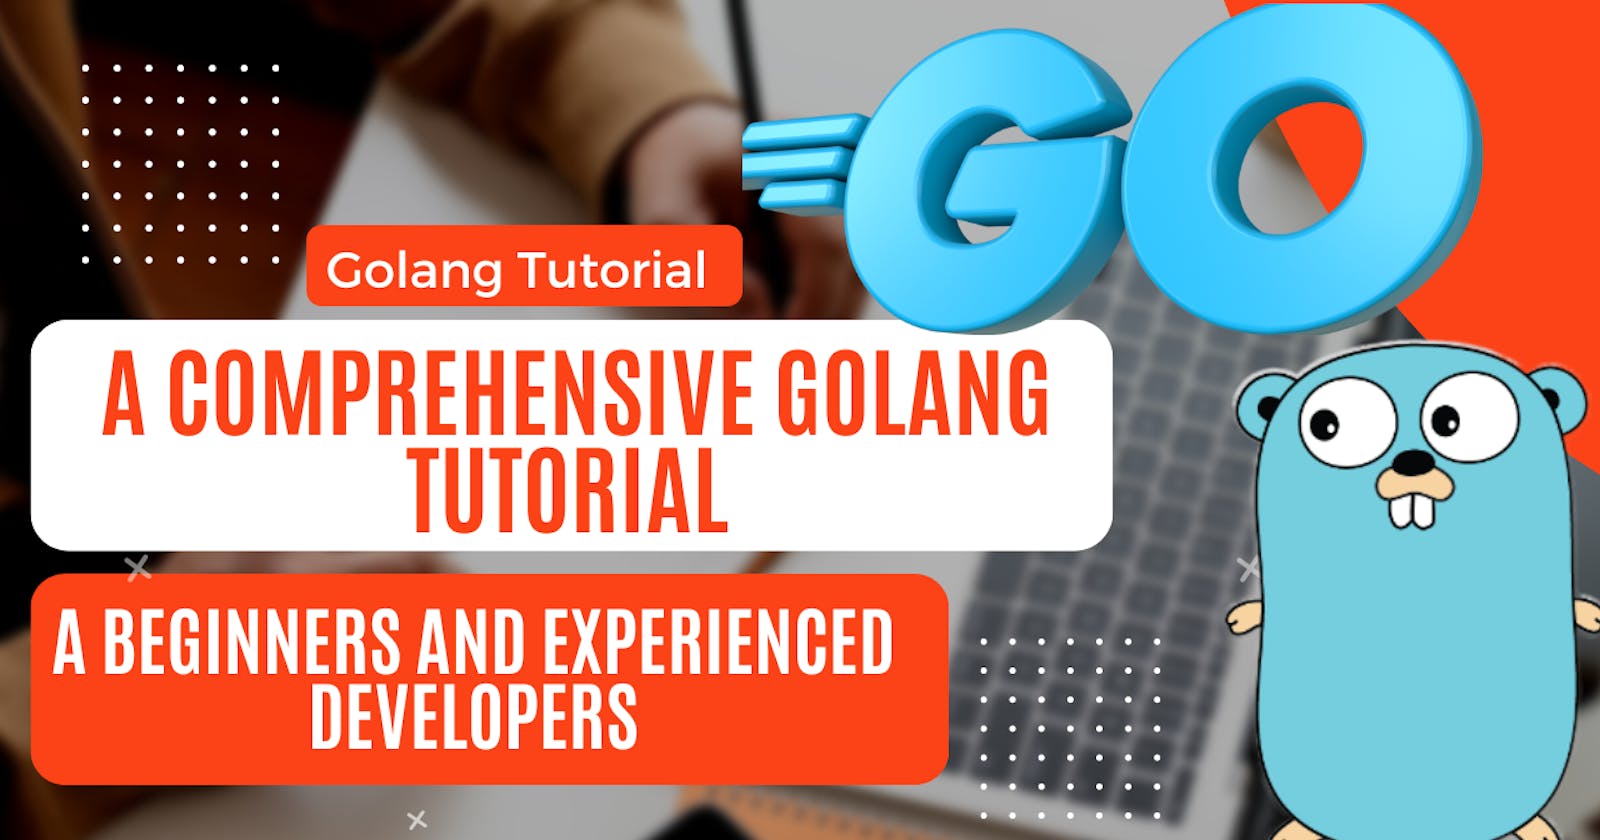 A Comprehensive Golang Tutorial for Beginners and Experienced Developers